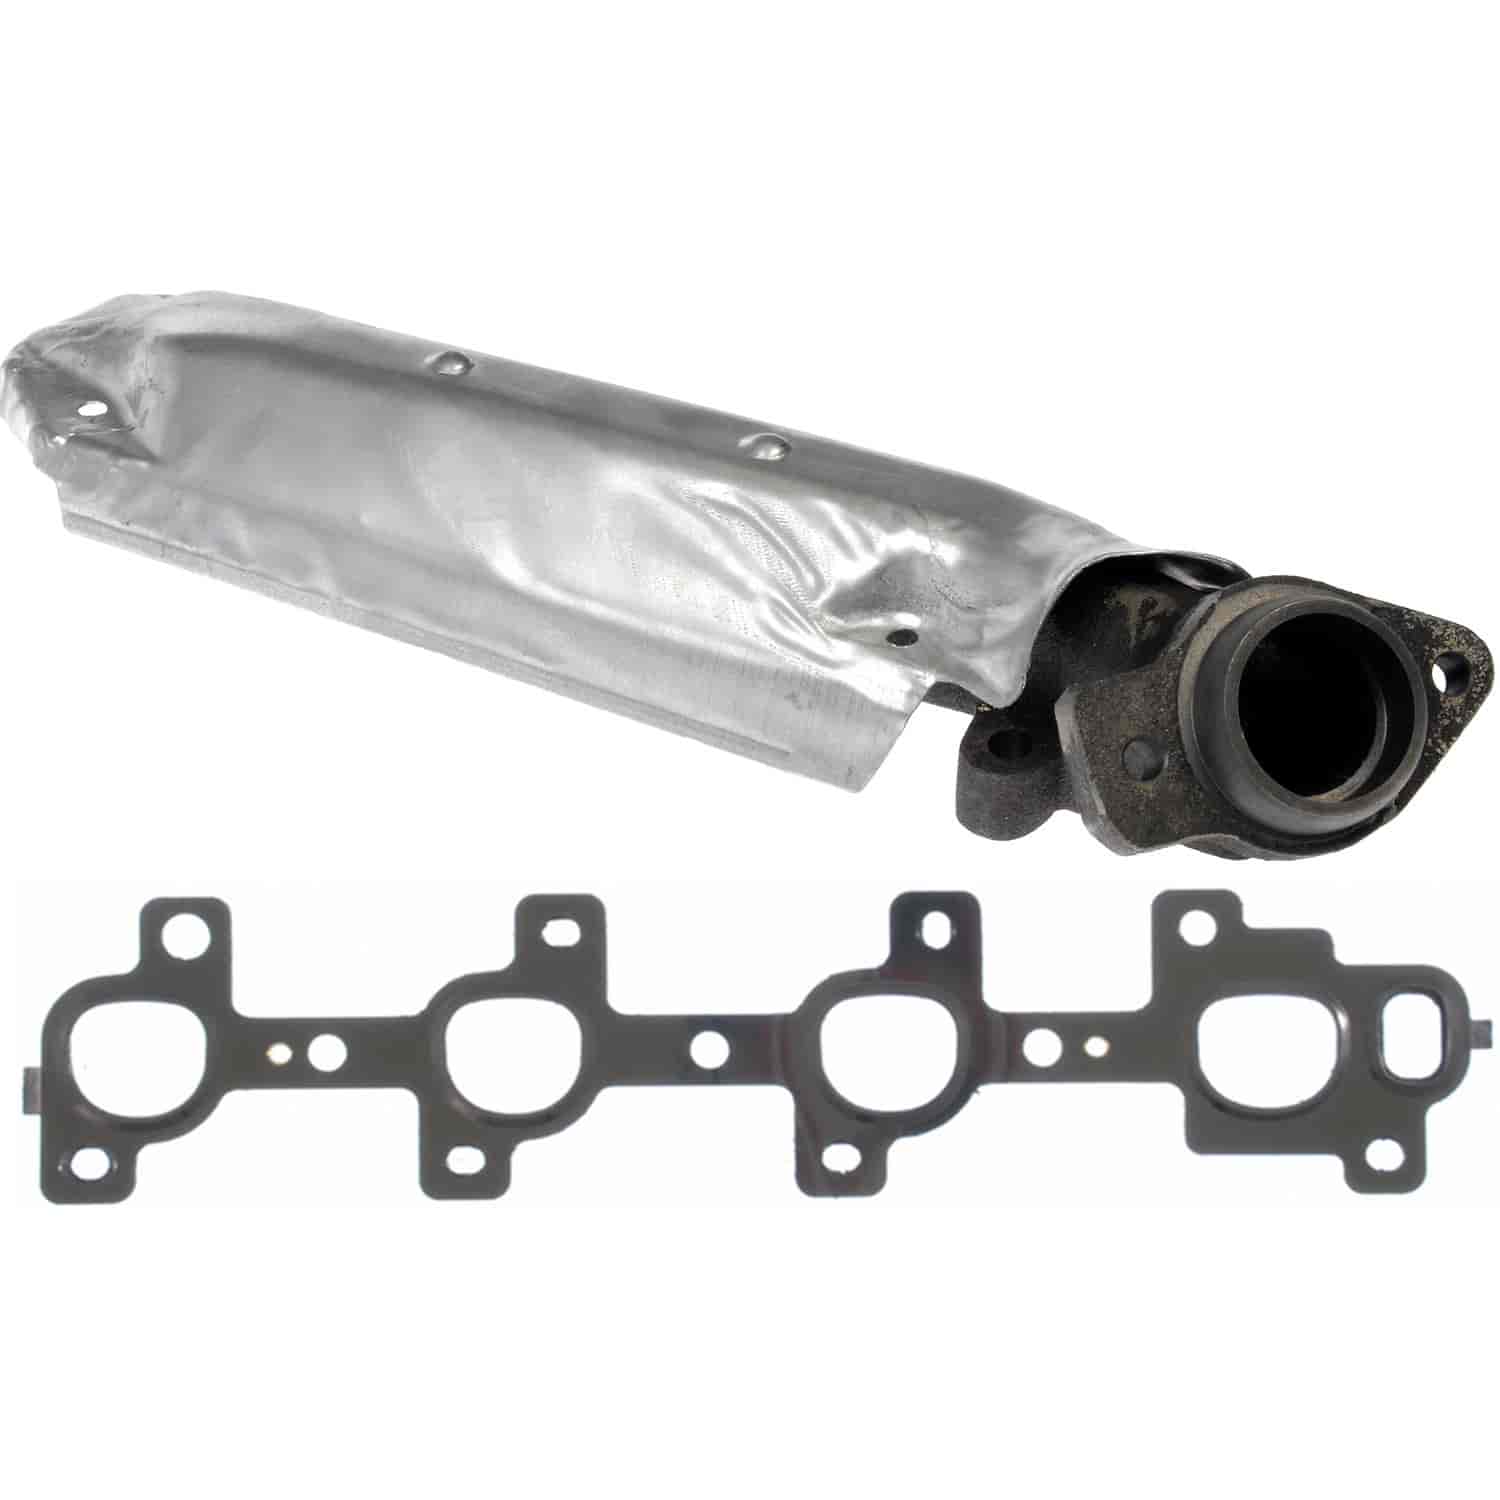 Exhaust Manifold Kit - Includes Required Hardware and